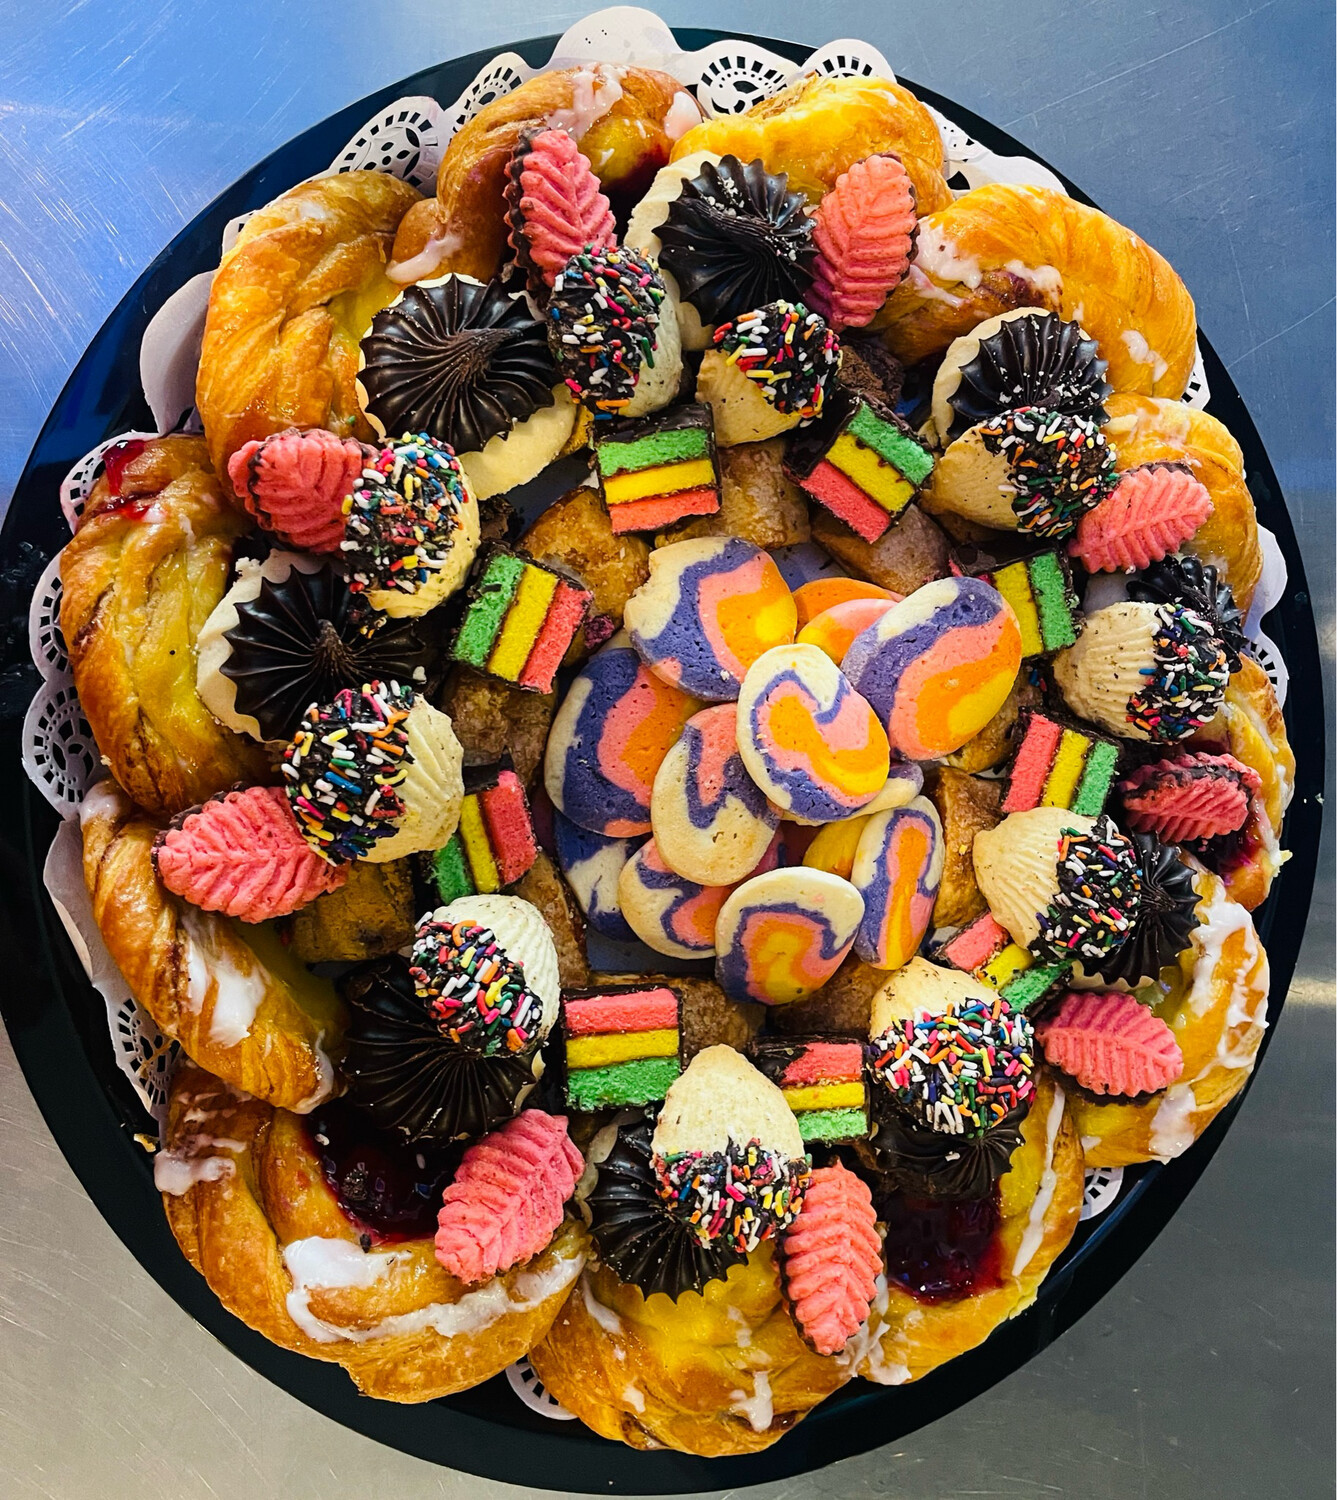 Pastry Platter (MUST ORDER AT LEAST 10 - Price is per person - with a minimum quantity of 10)